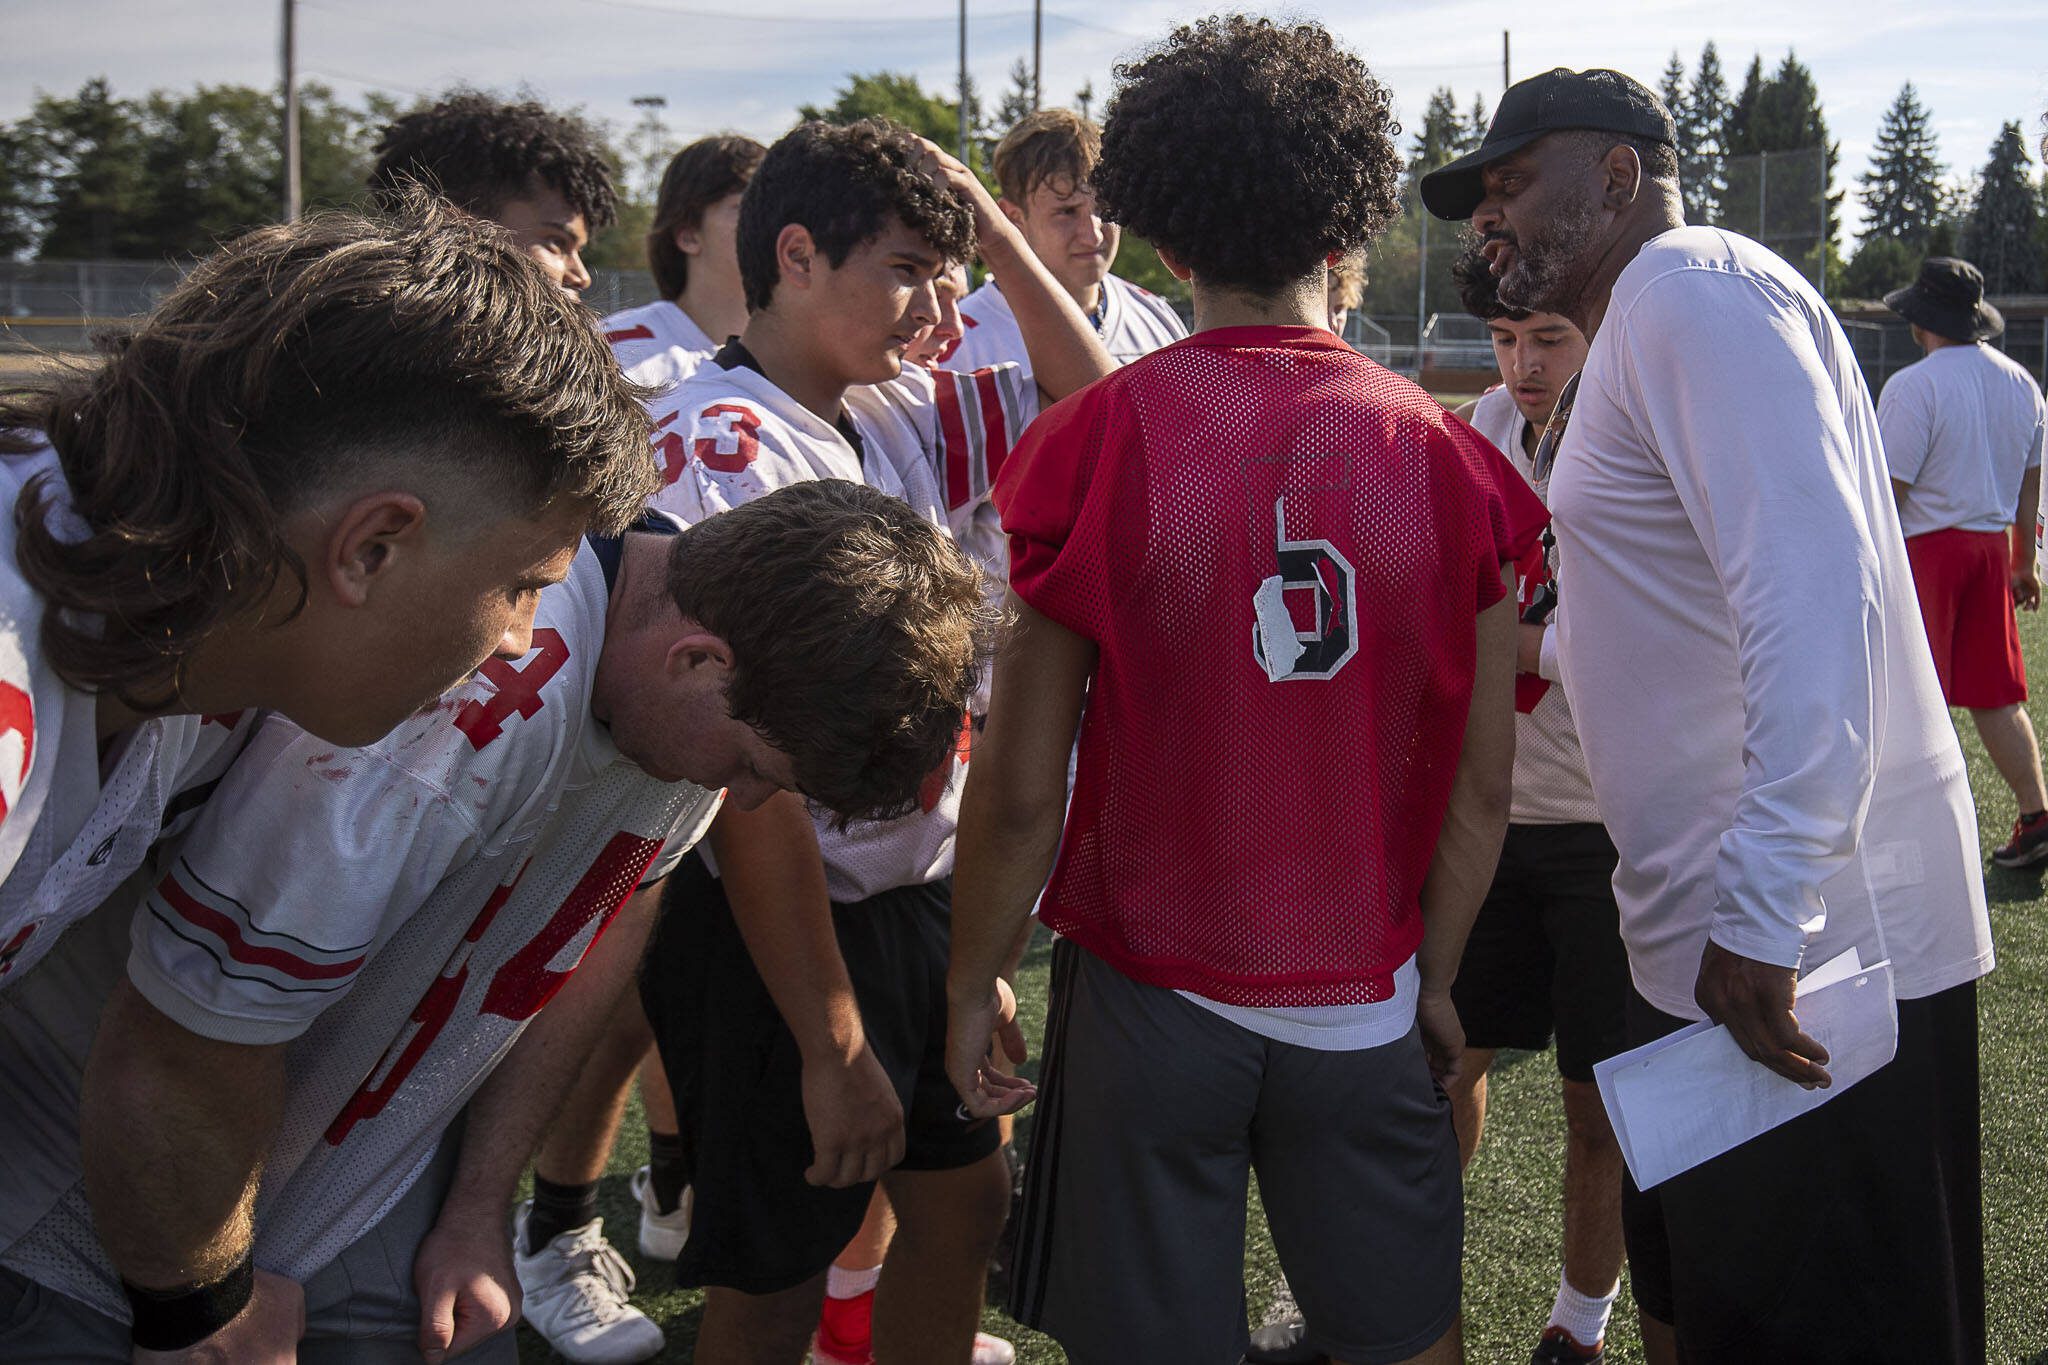 Head Coach Archie Malloy, right, gives directions in a huddle during a football practice Thursday at Mountlake Terrace High School. (Annie Barker / The Herald)